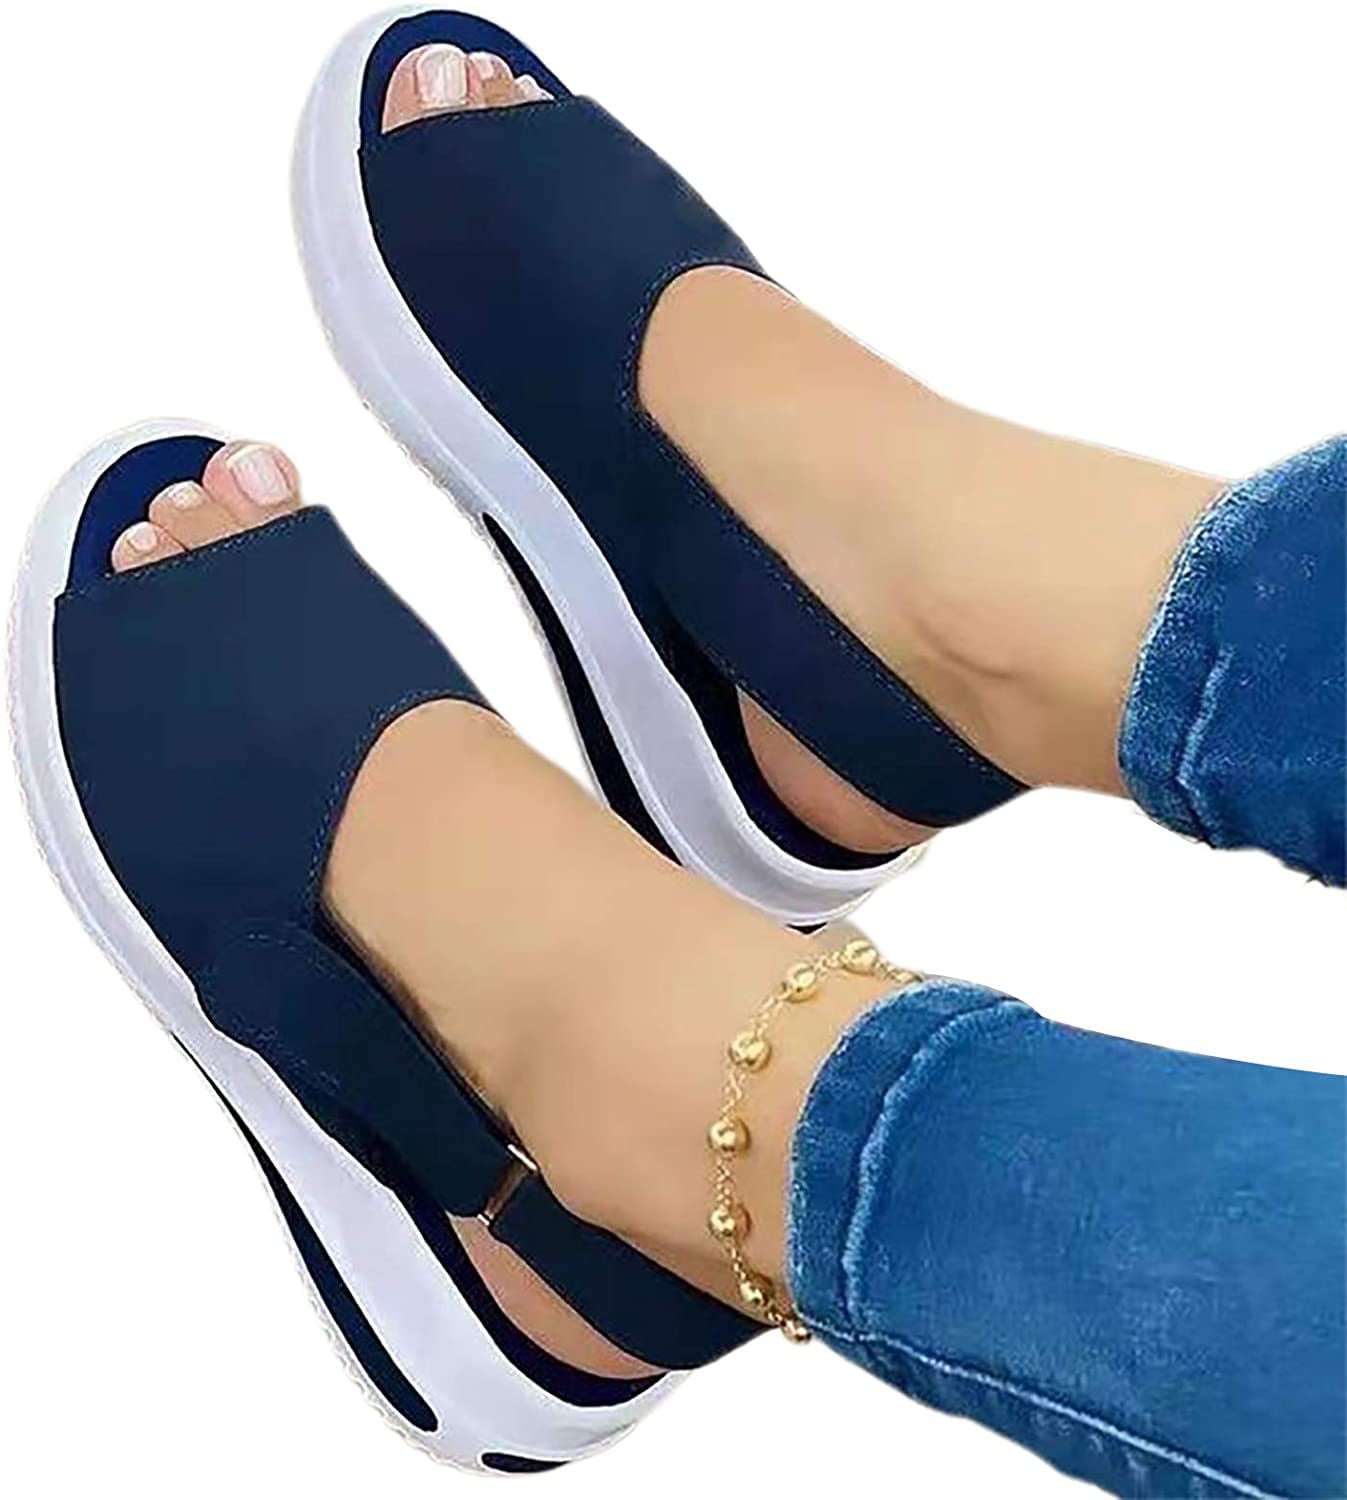 Fashion Women Thick Bottom Leather Casual Sandals Swing Peep-Toe Slingback Shoes